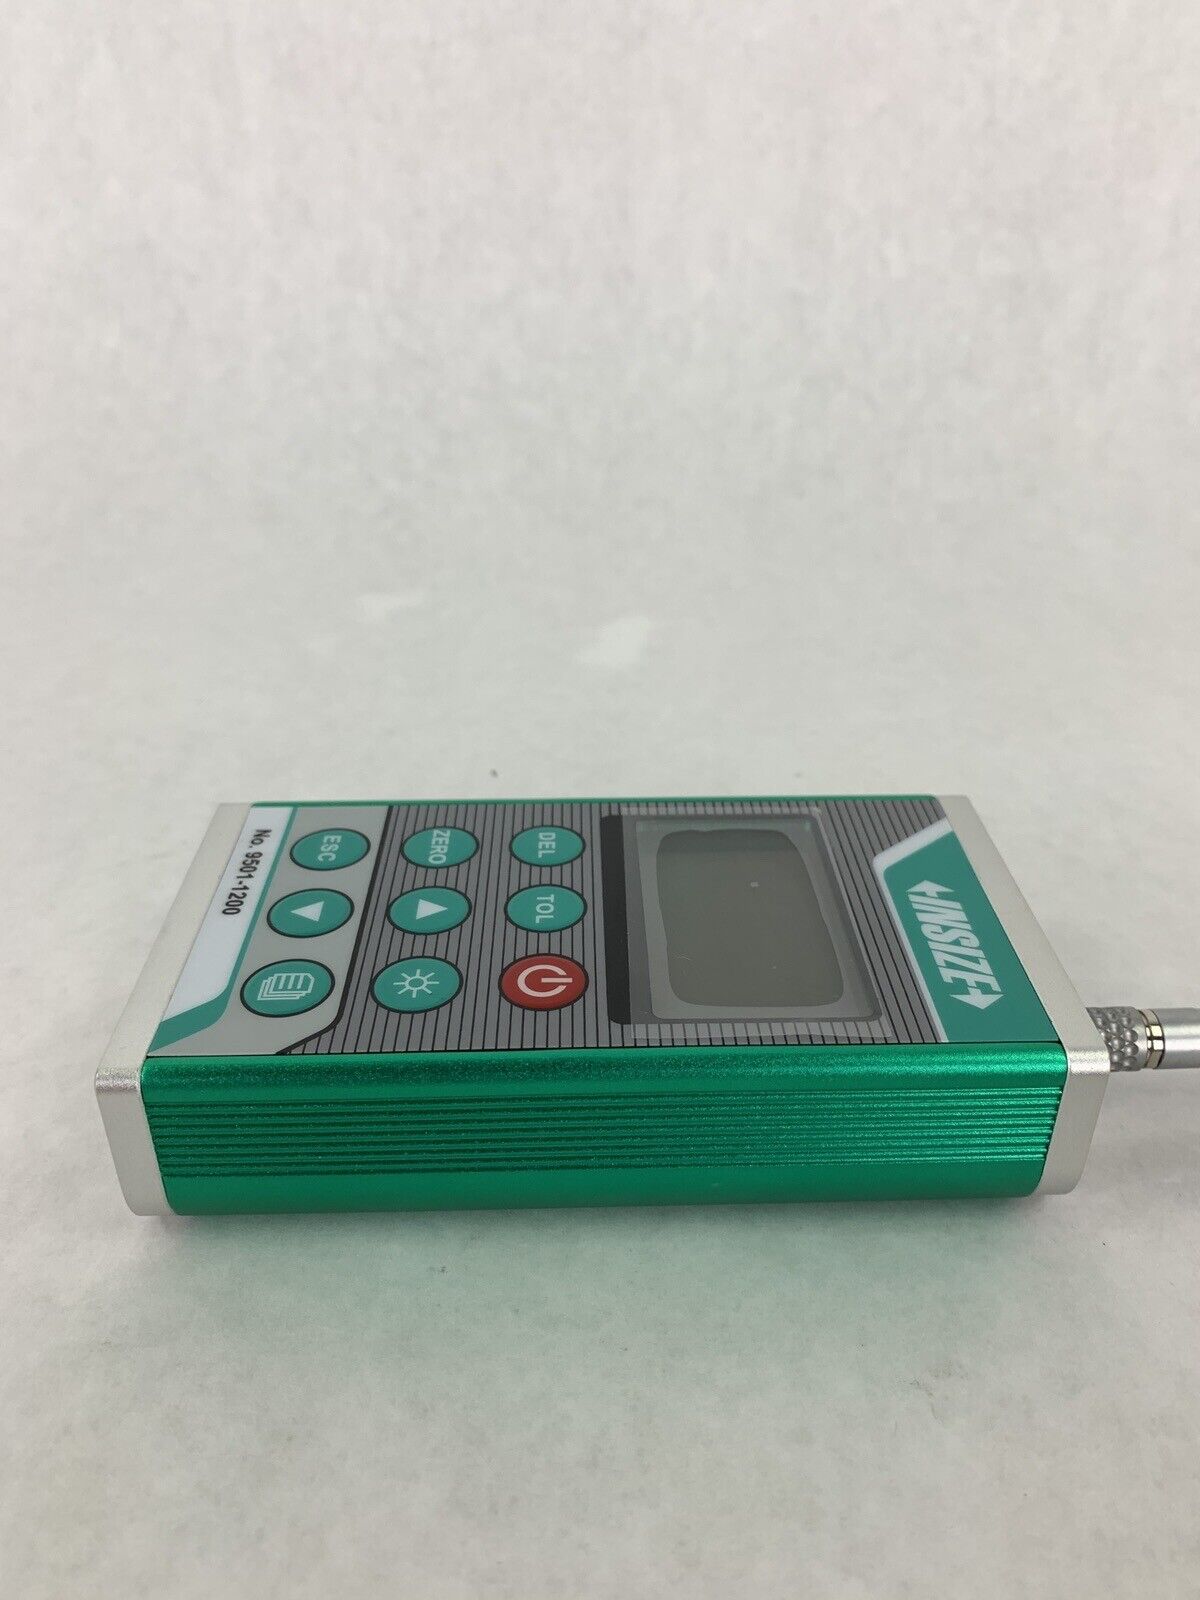 Insize 9501-1200 Coating Thickness Gage Power Tested